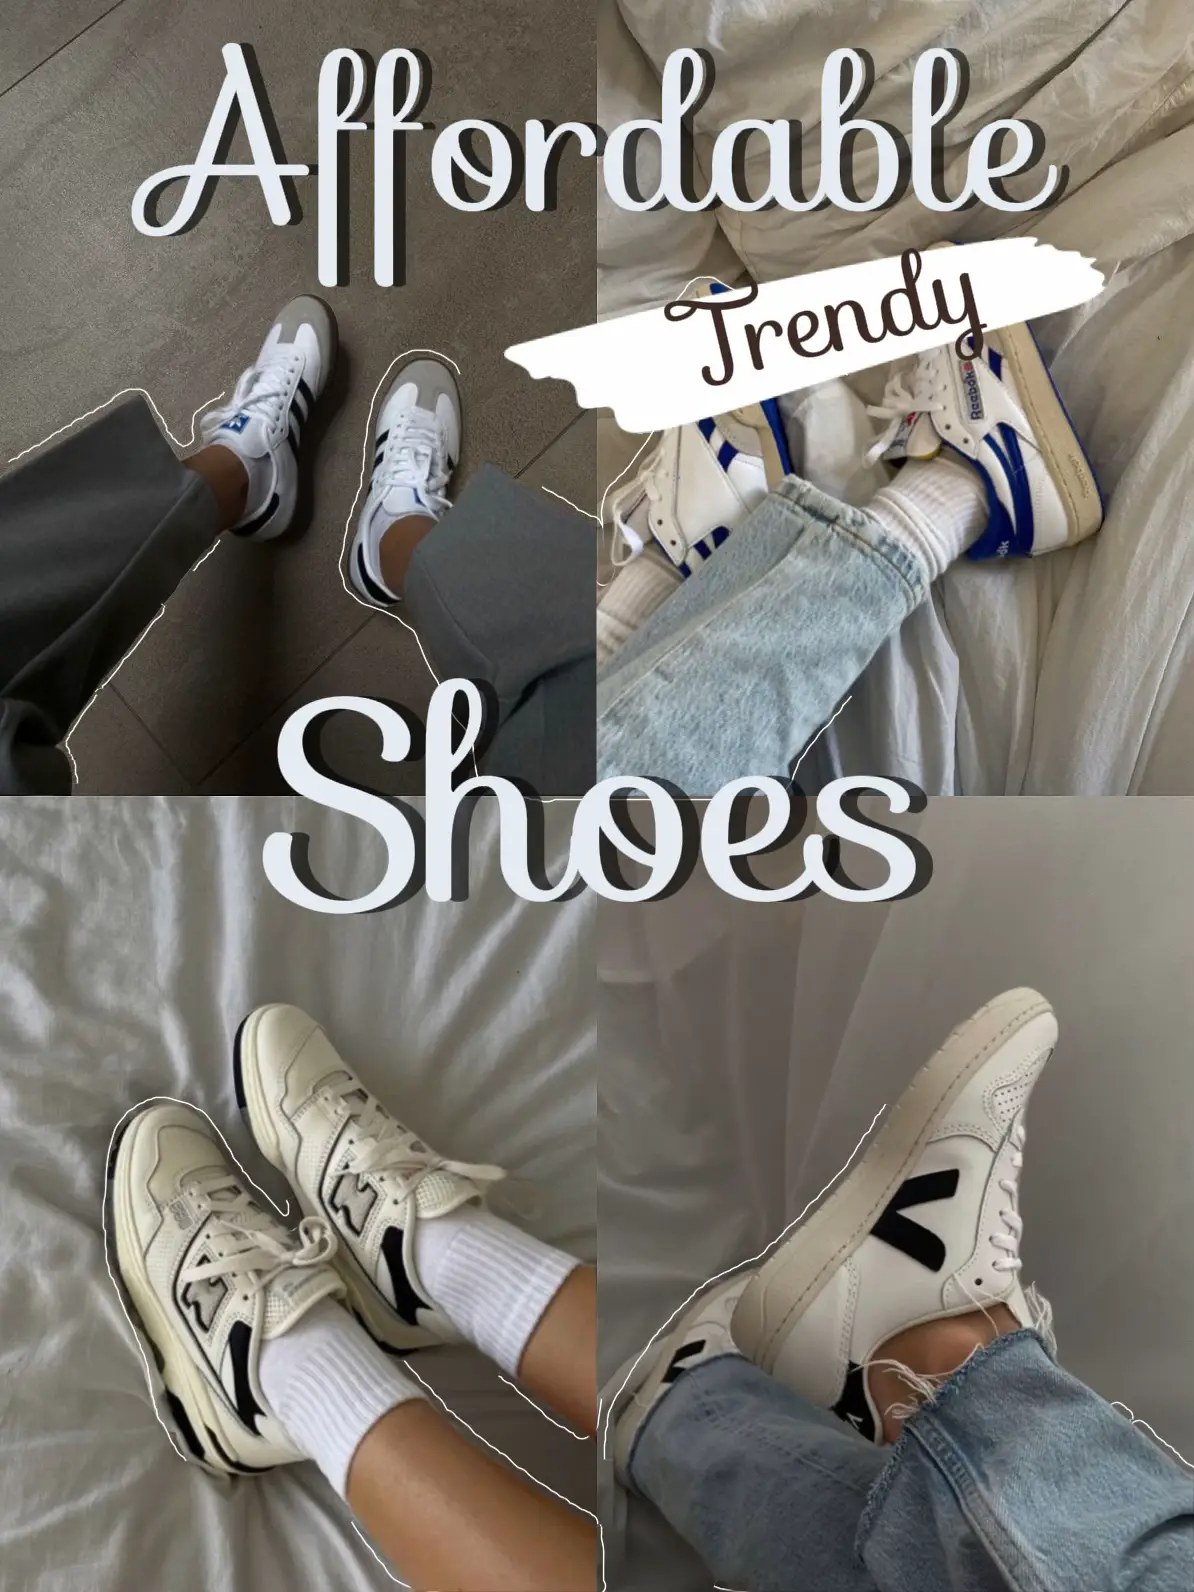 AFFORDABLE TRENDY SHOES's images